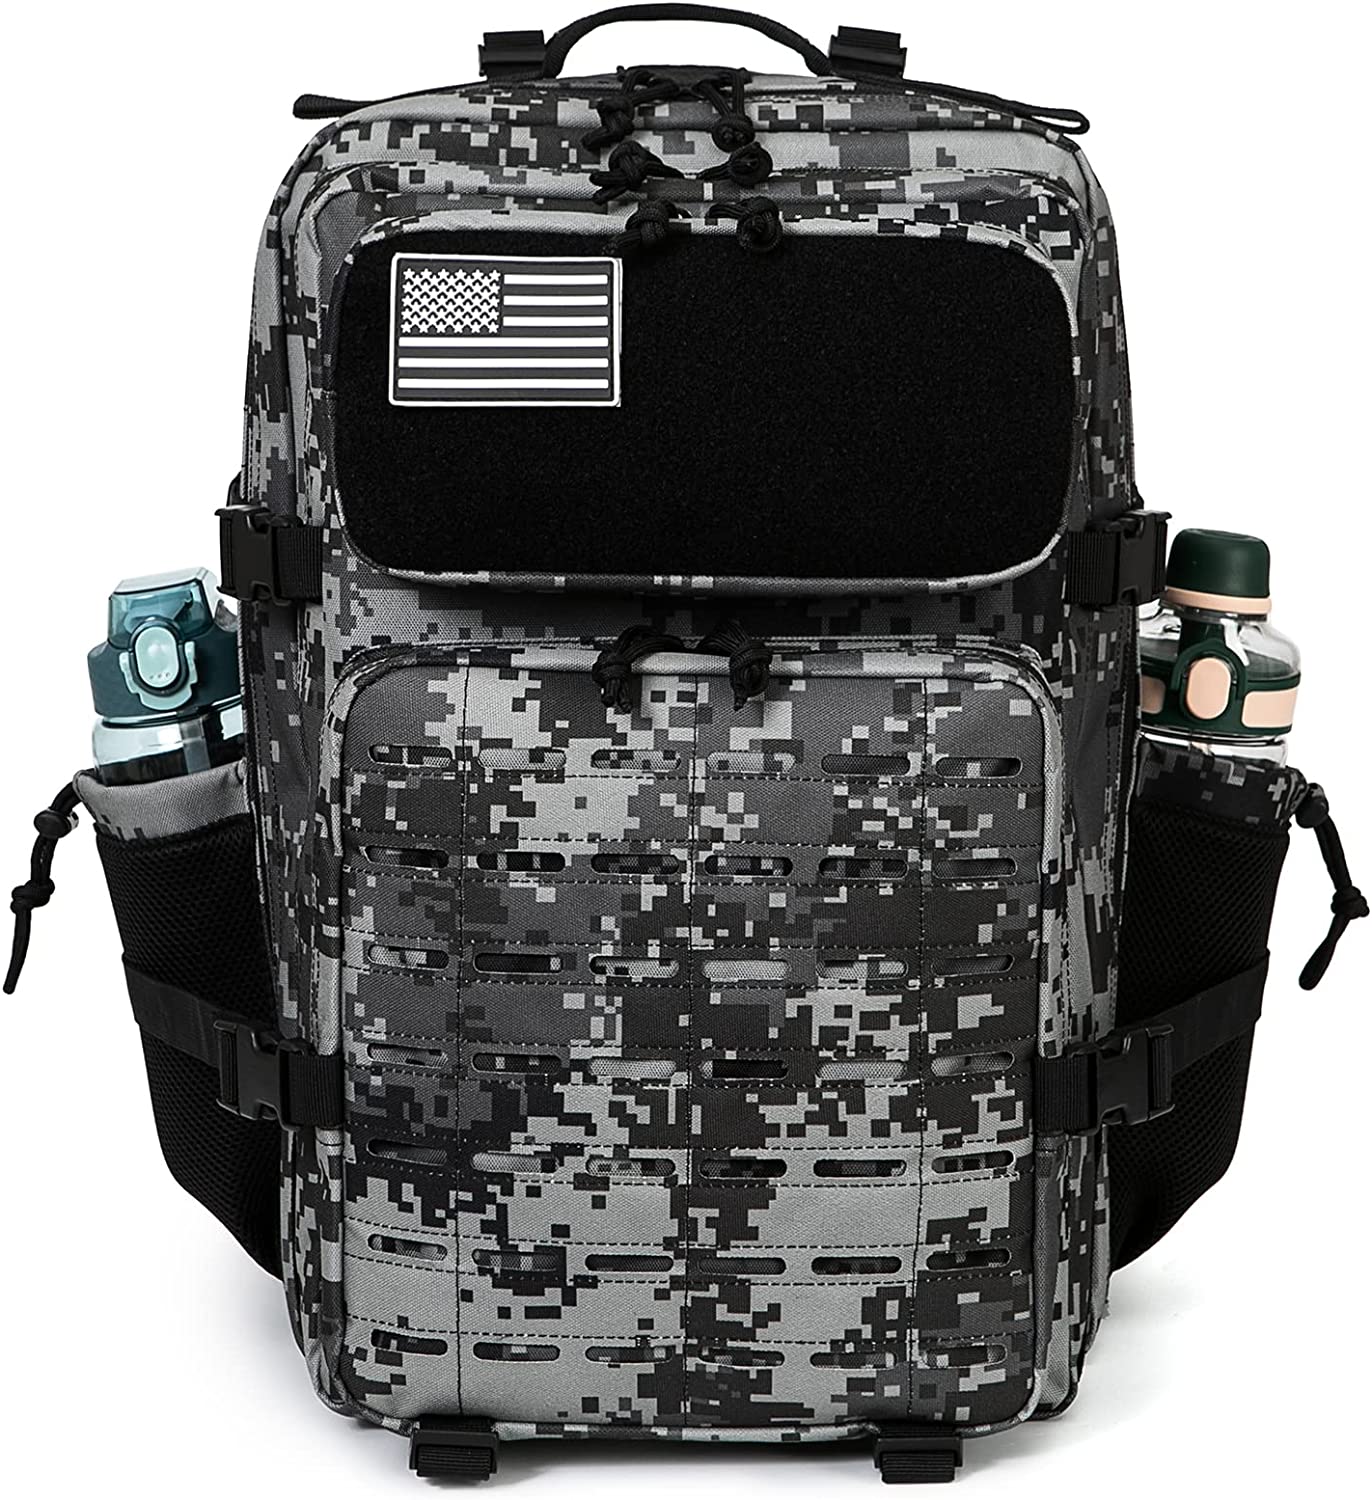 35l Crossfit Backpack Military Tactical Rucksacks Outdoor Sports